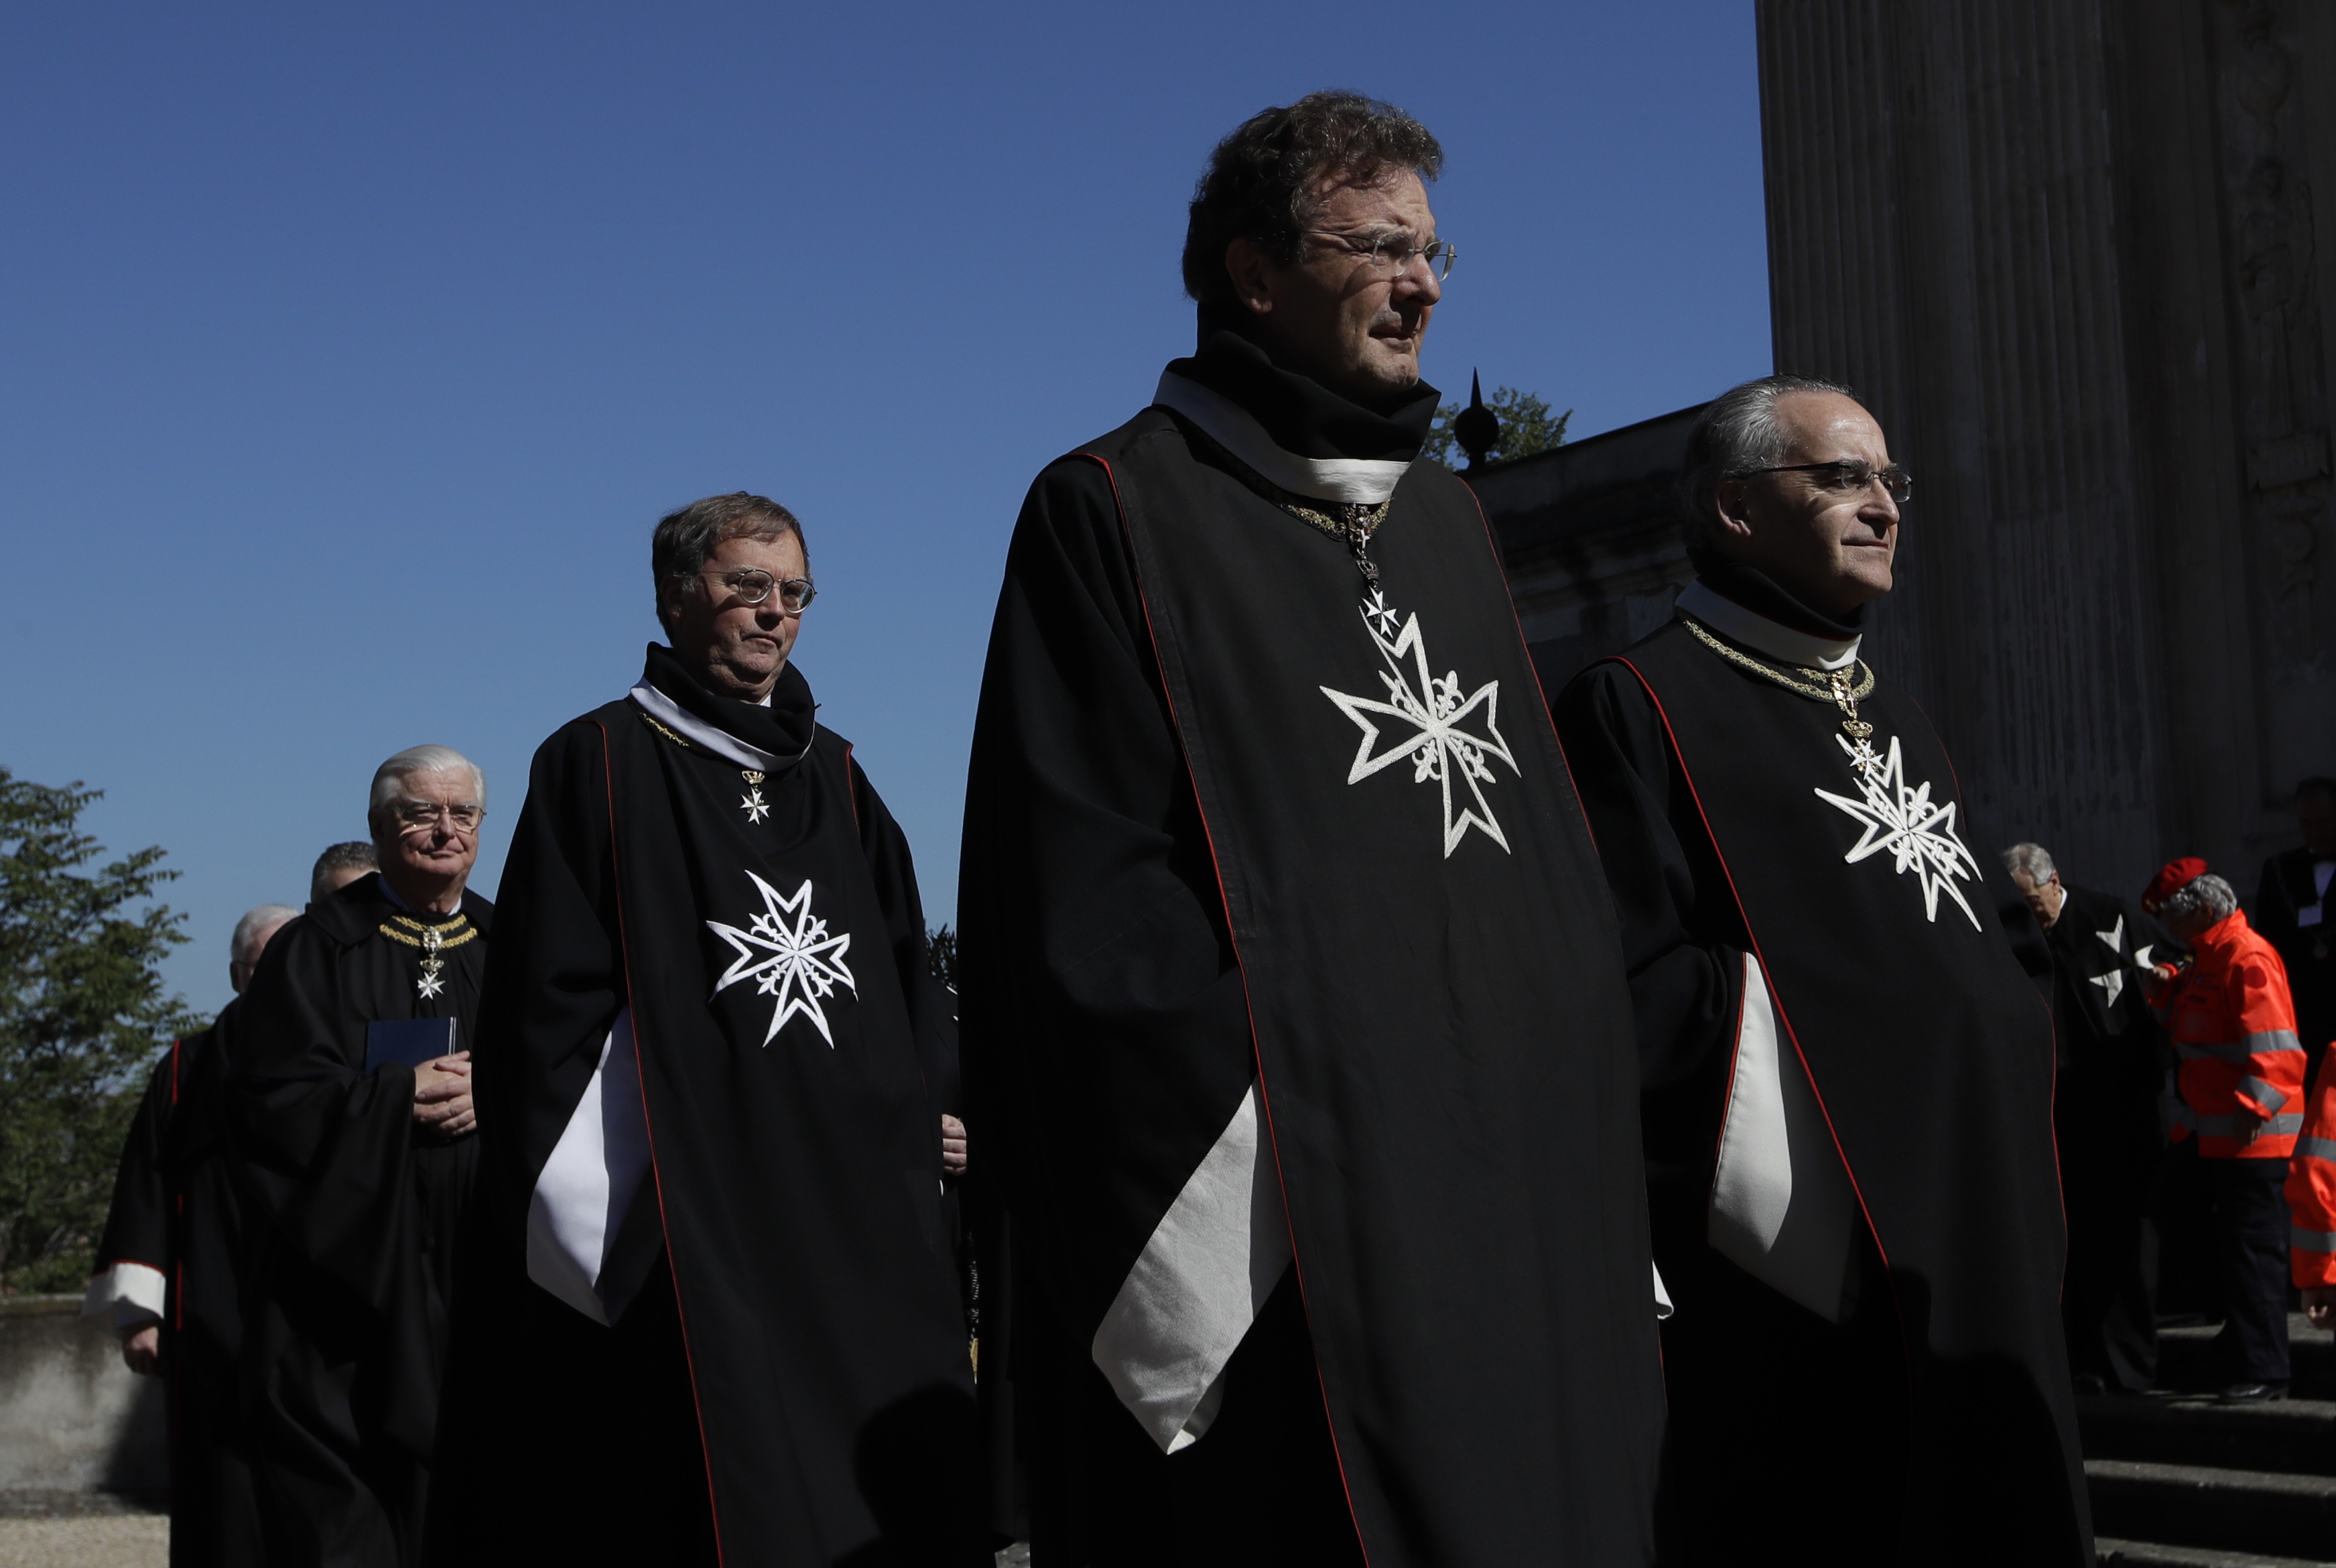 Albrecht von Boeselager, second from right, walks in procession along with other Knights of Malta before the election of the new Grand Master, at the order's Villa Magistrale on Rome's Aventine Hill ahead of the secret balloting on April 29, 2017 (AP Phot